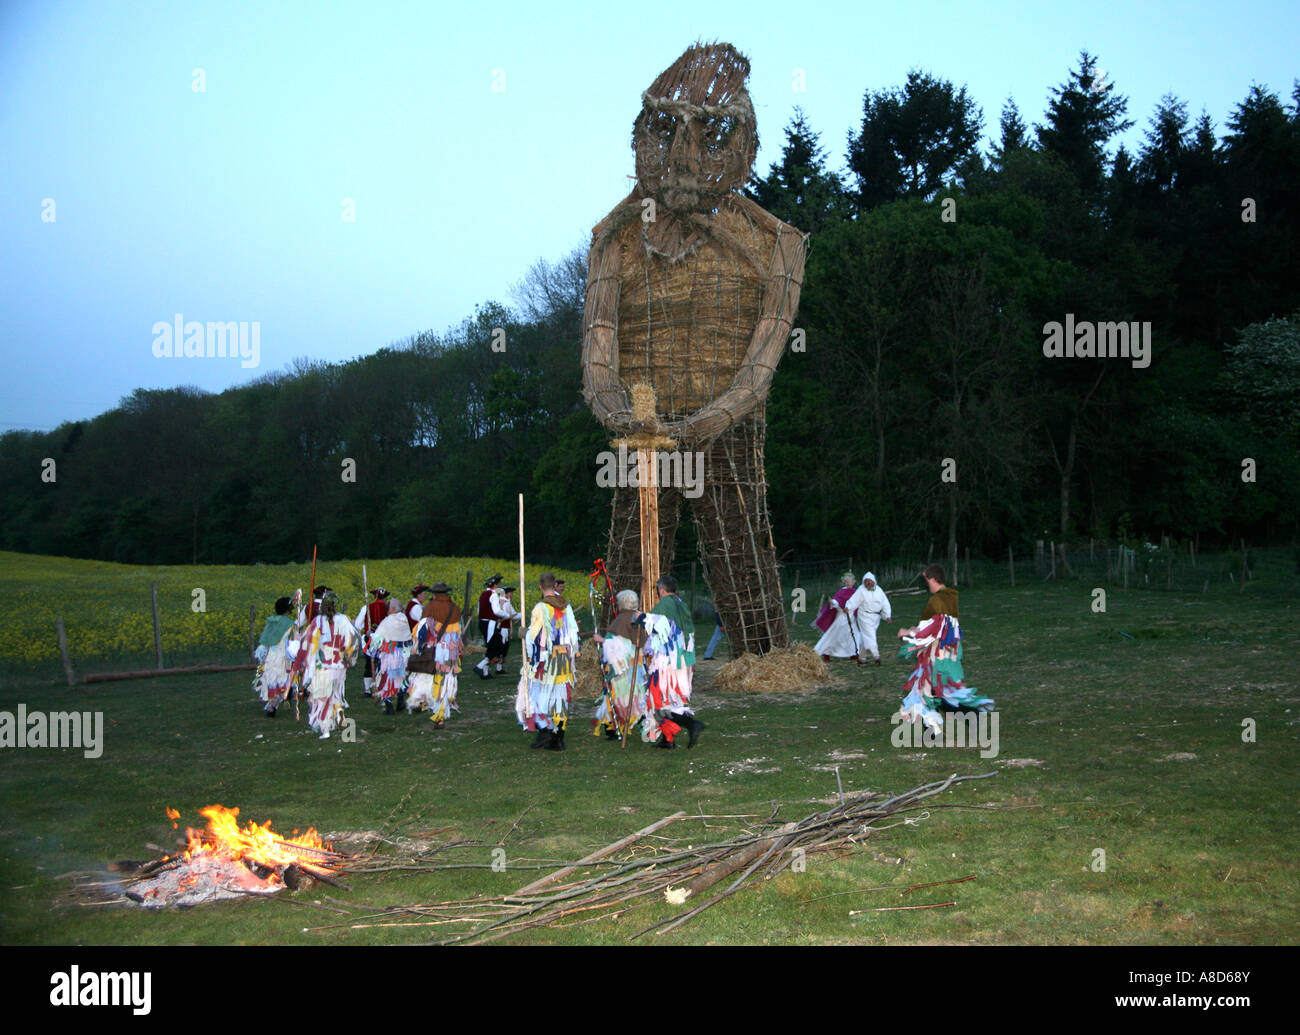 Pagans dance round the Wicker Man Stock Photo